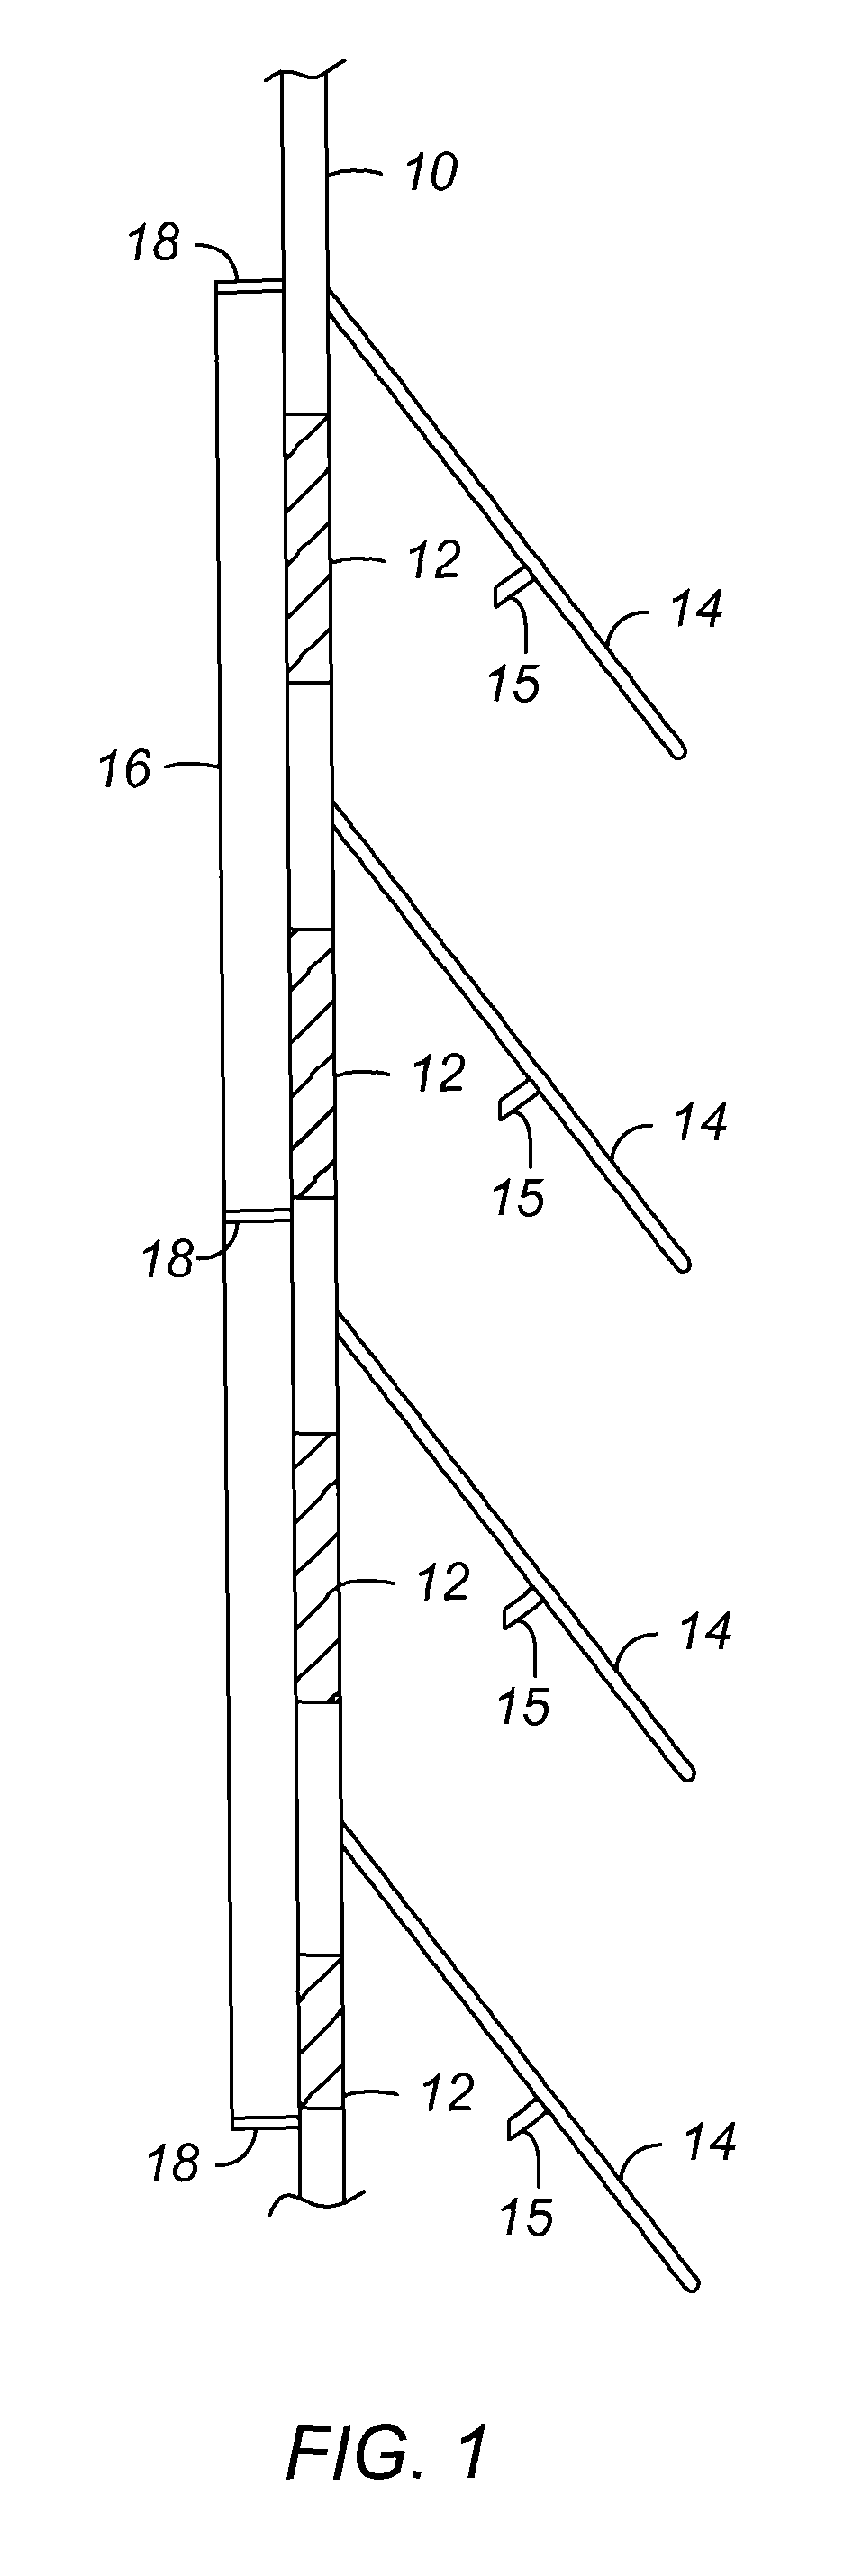 Secondary containment for a perforated plate